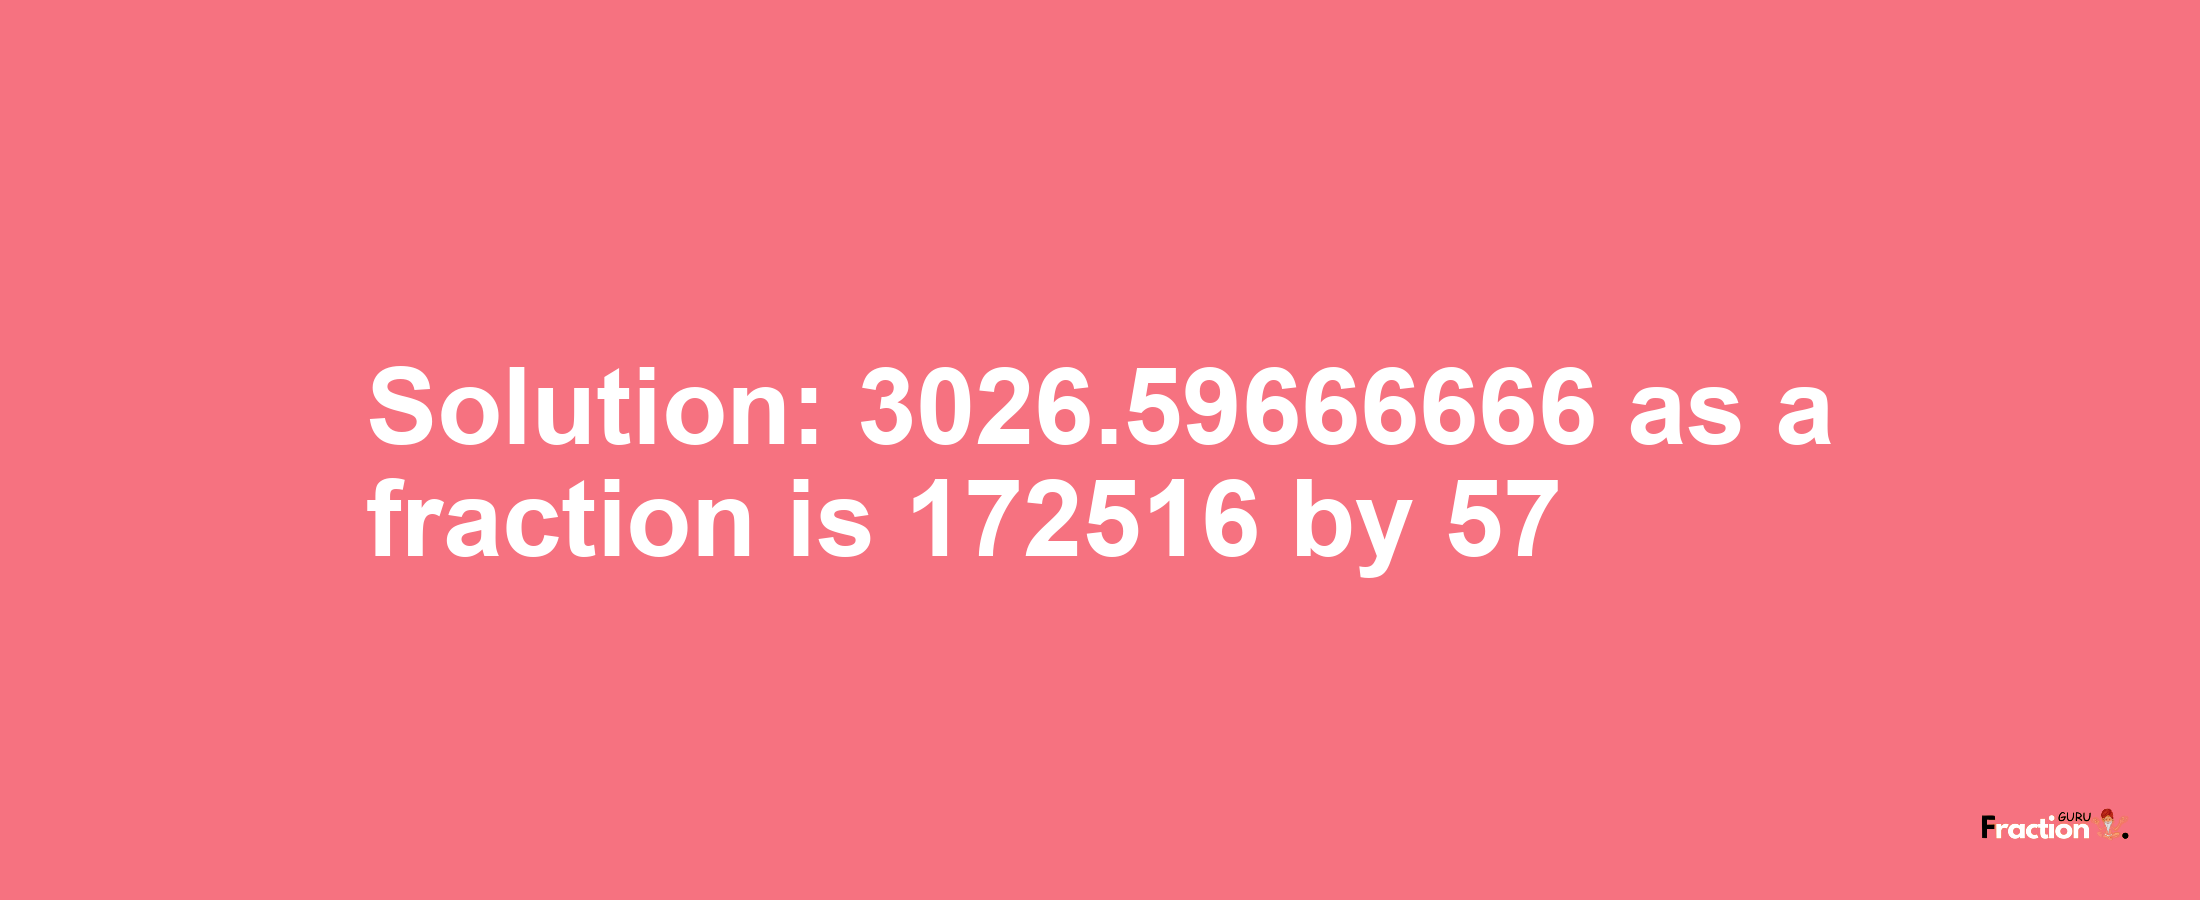 Solution:3026.59666666 as a fraction is 172516/57